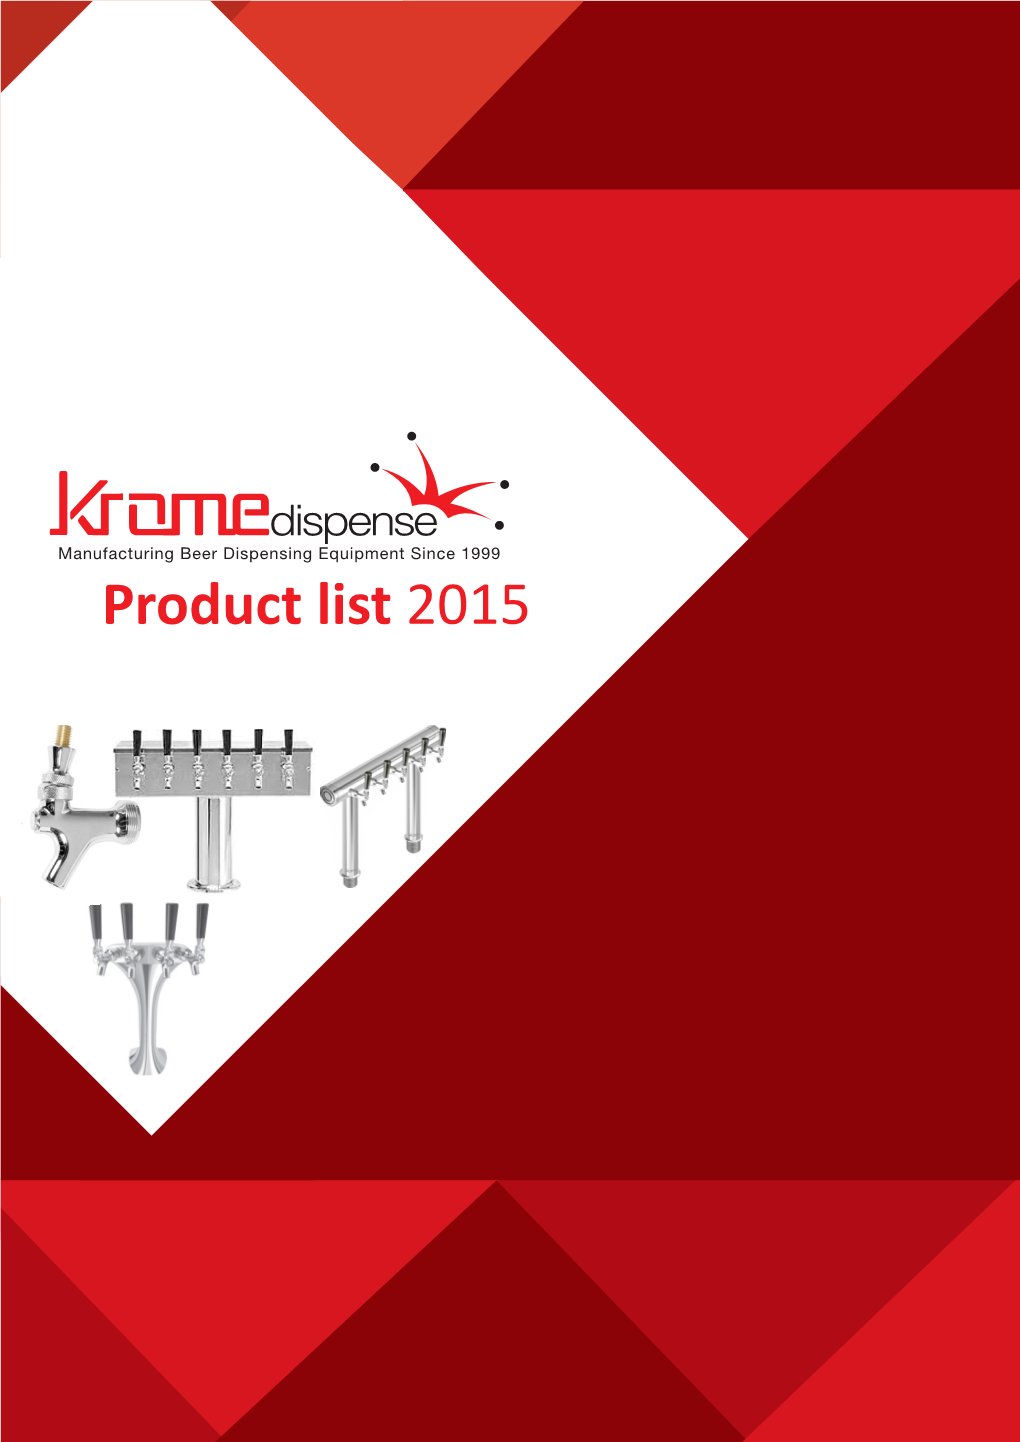 Product List 2015 PACIFIC MERCHANTS Is a Professional Manufacturer of Keg Beer Dispensing and Home Brewing Equipment Since 1998